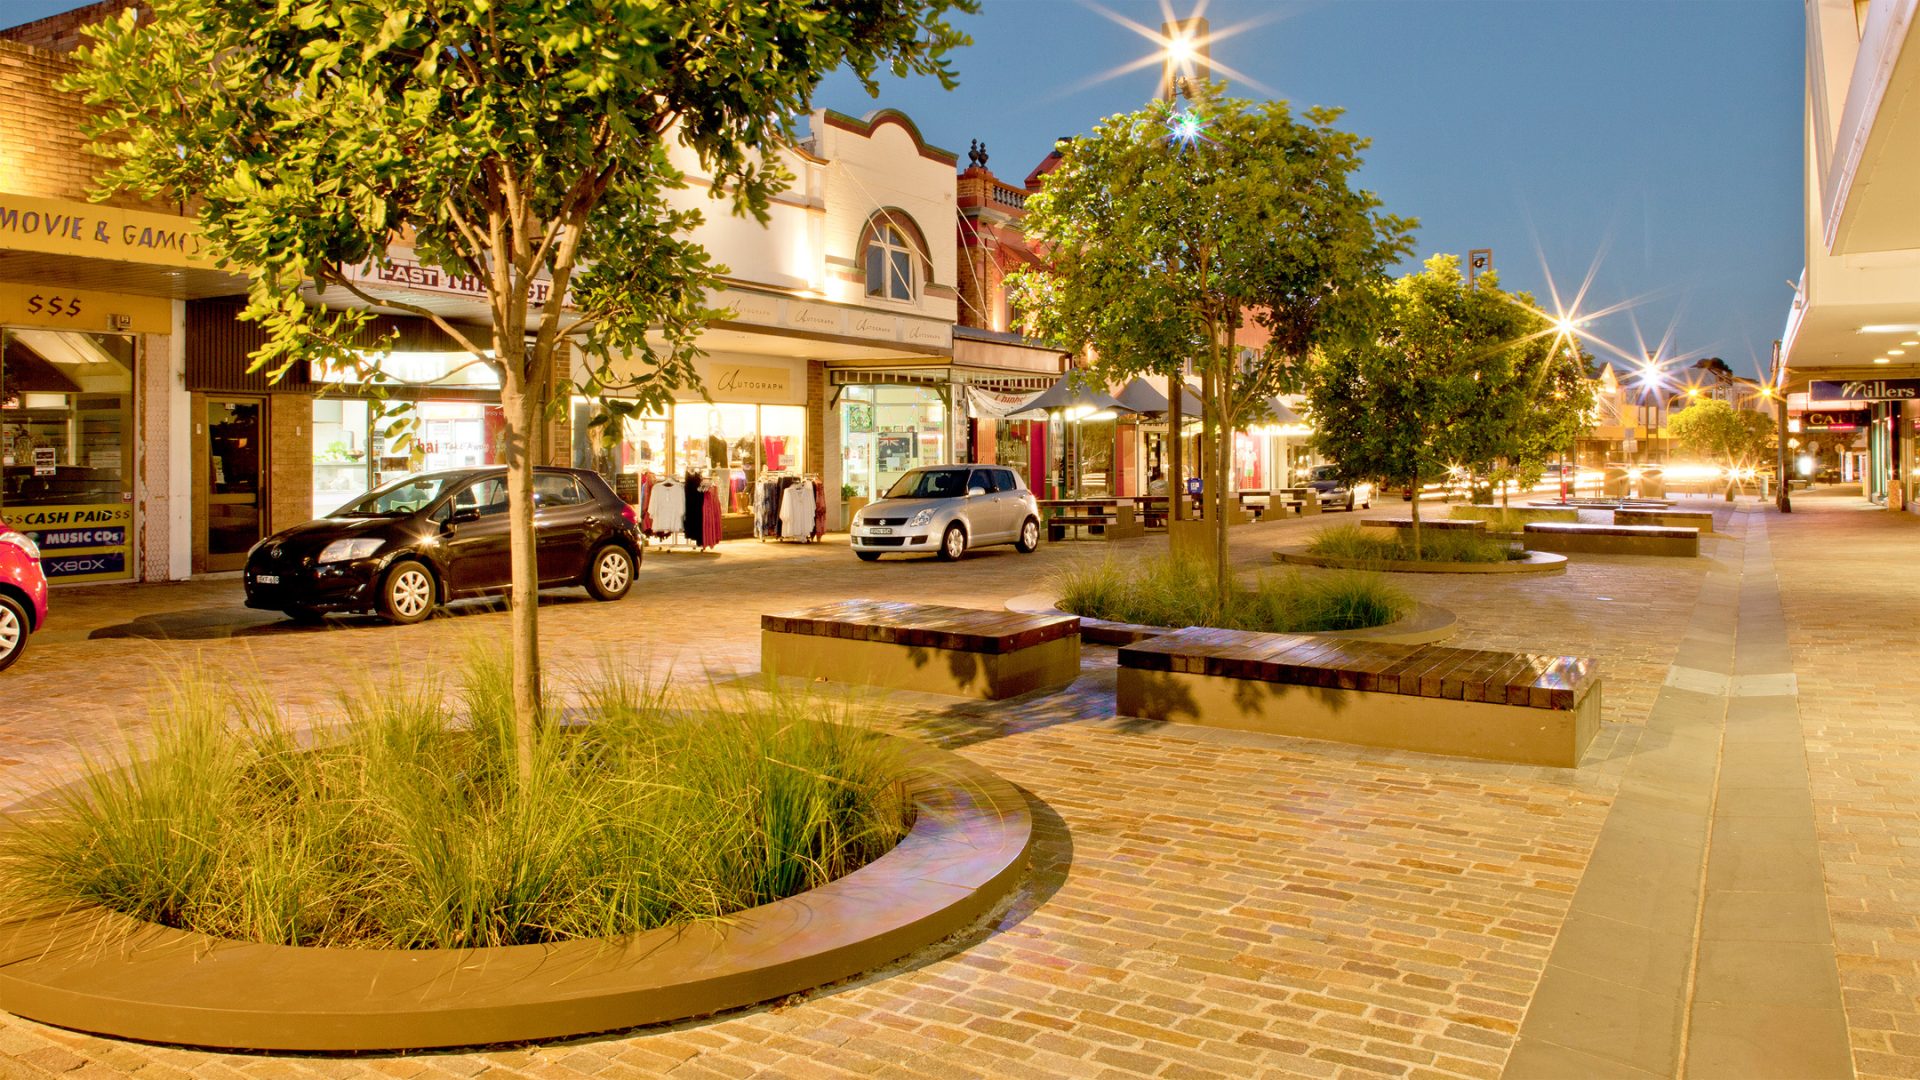 A well-lit, cobblestone street in Maitland, lined with trees and benches at dusk. Retail shops with large windows displaying clothing are on the left, and cars are parked along the side. A few pedestrians are walking along the levee, creating a calm, inviting atmosphere.